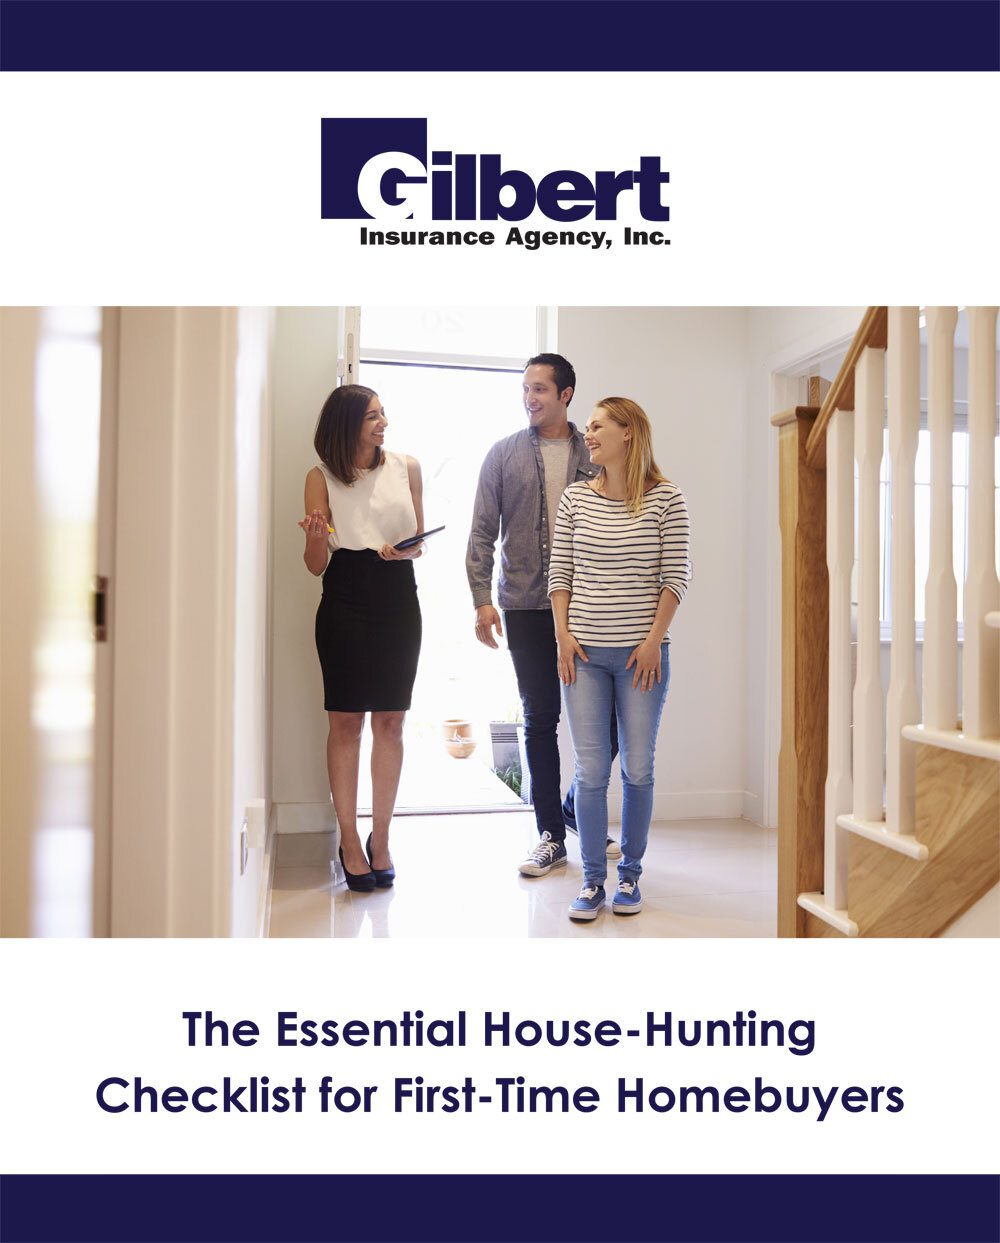 PDF cover image for First Time Homebuyers Checklist Part 2